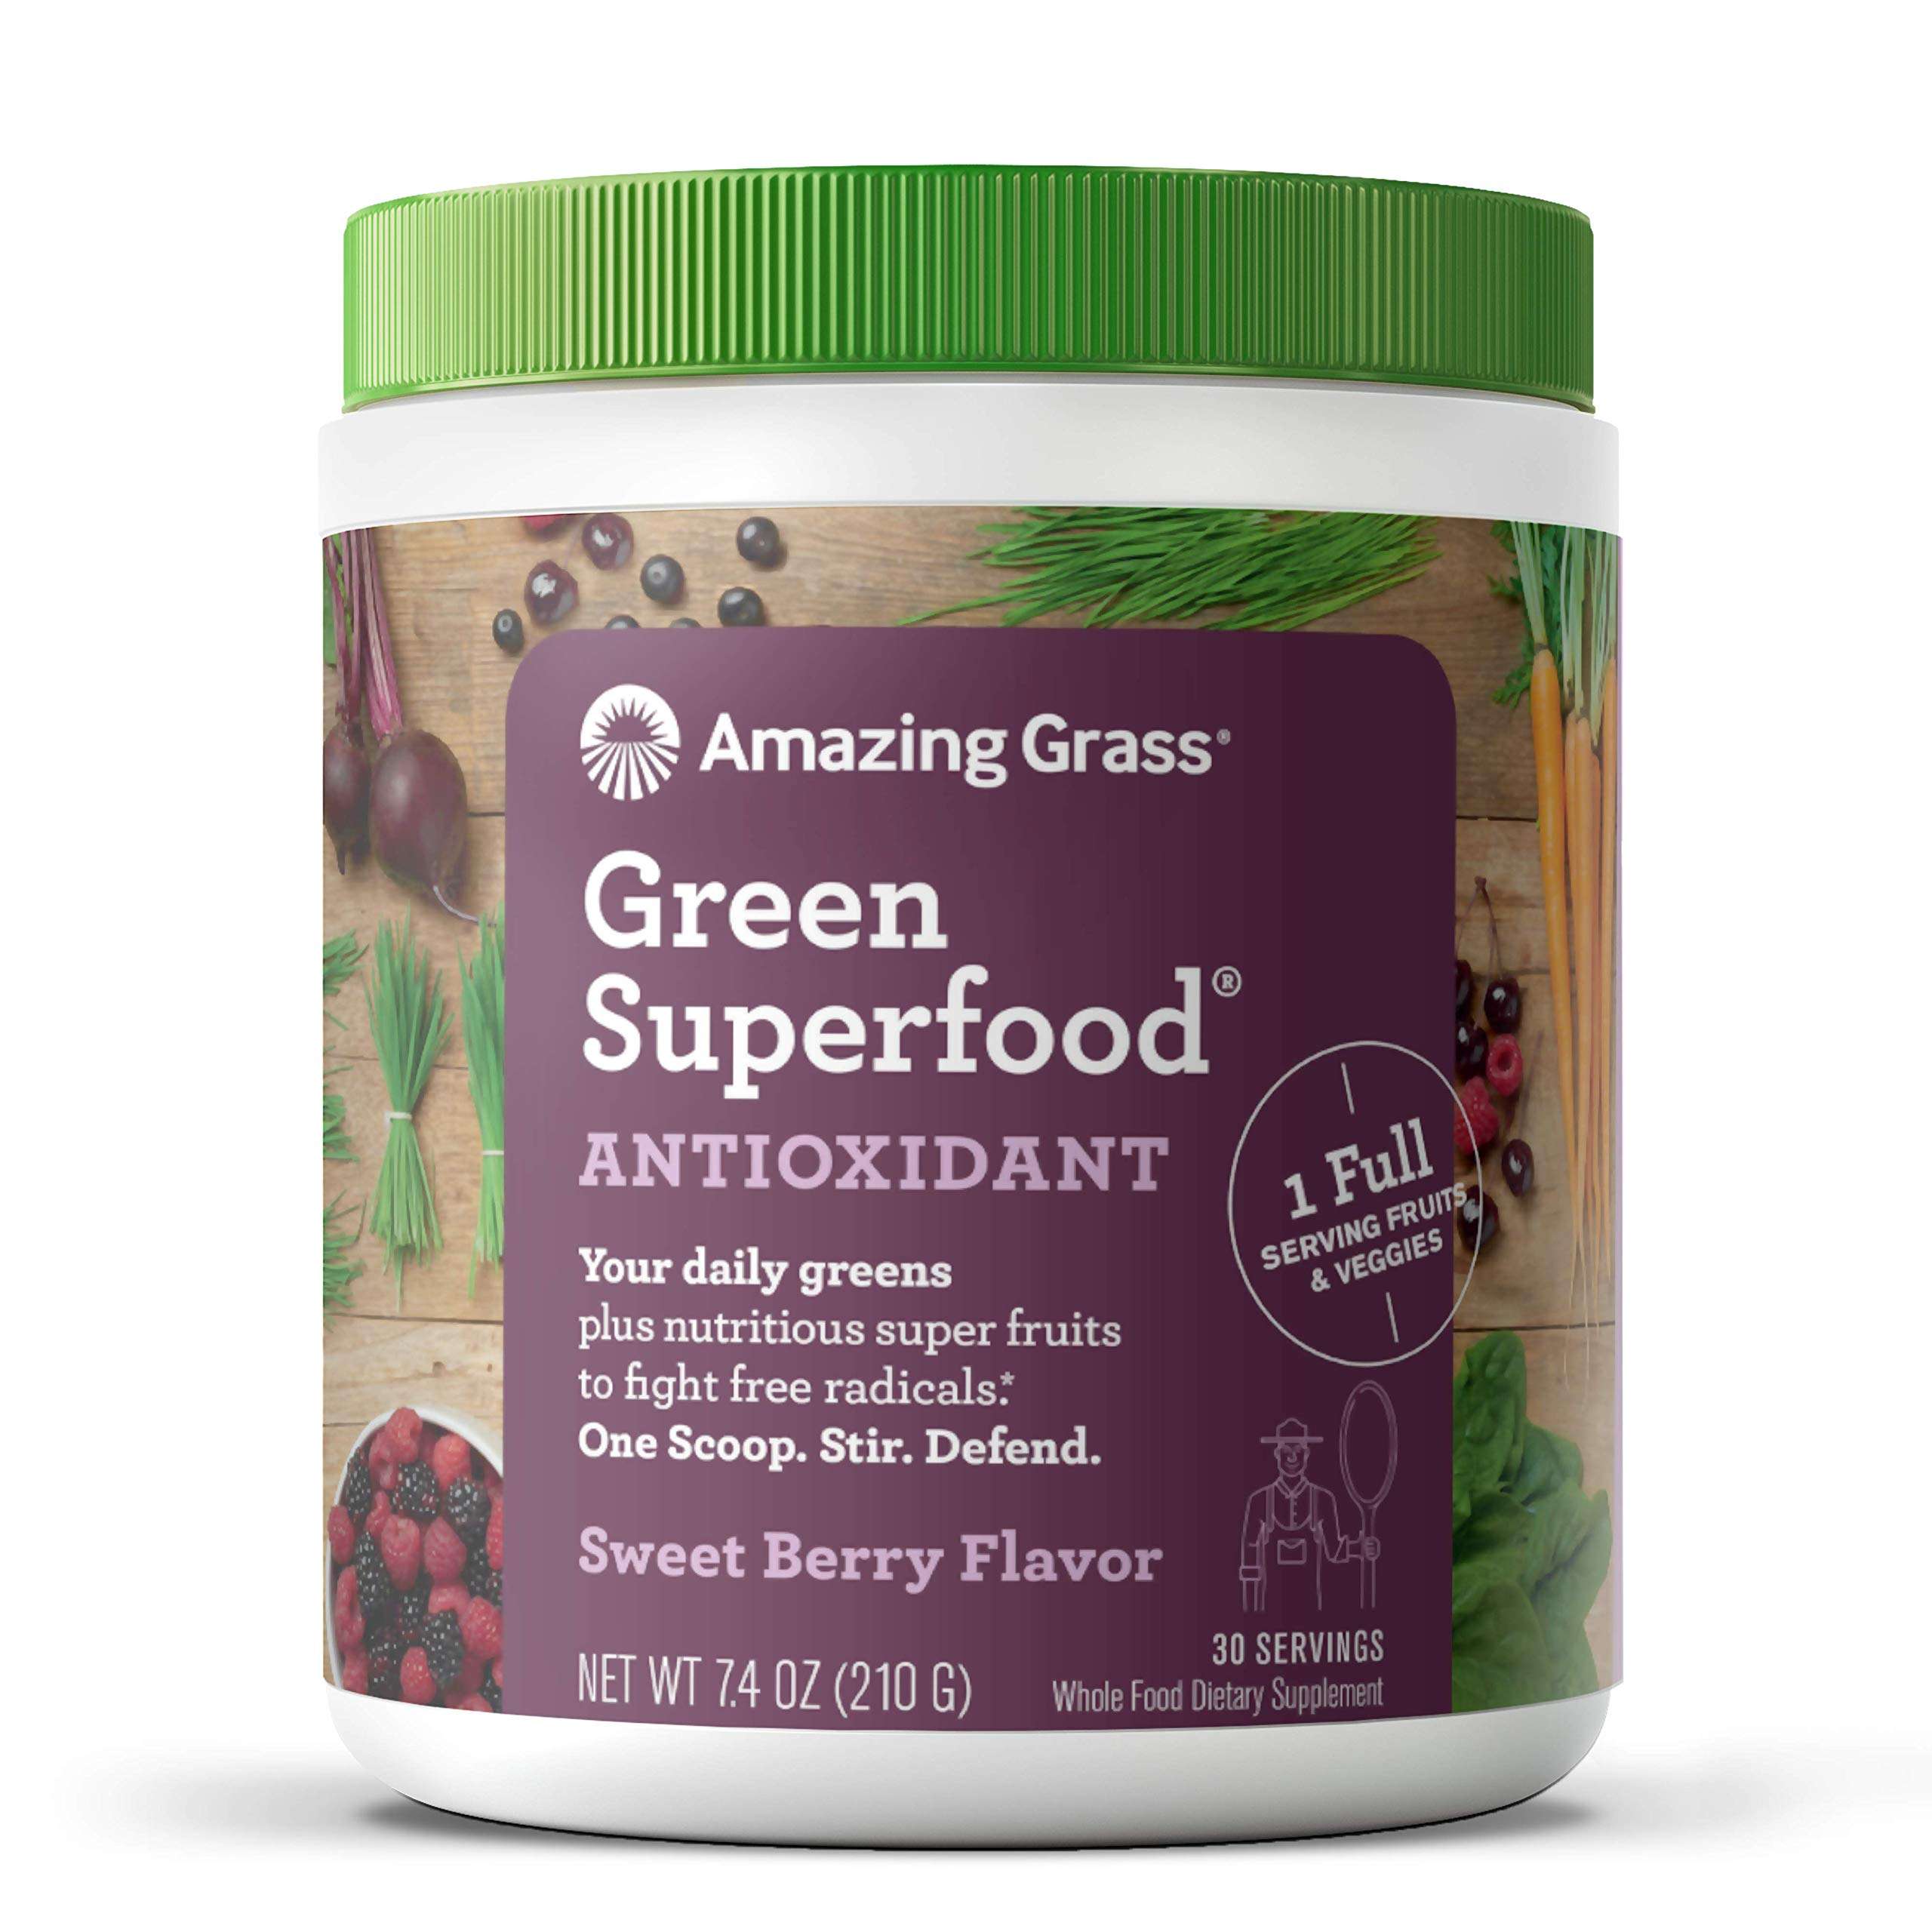 Amazing Grass Green Superfood Antioxidant: Super Greens Powder with ...